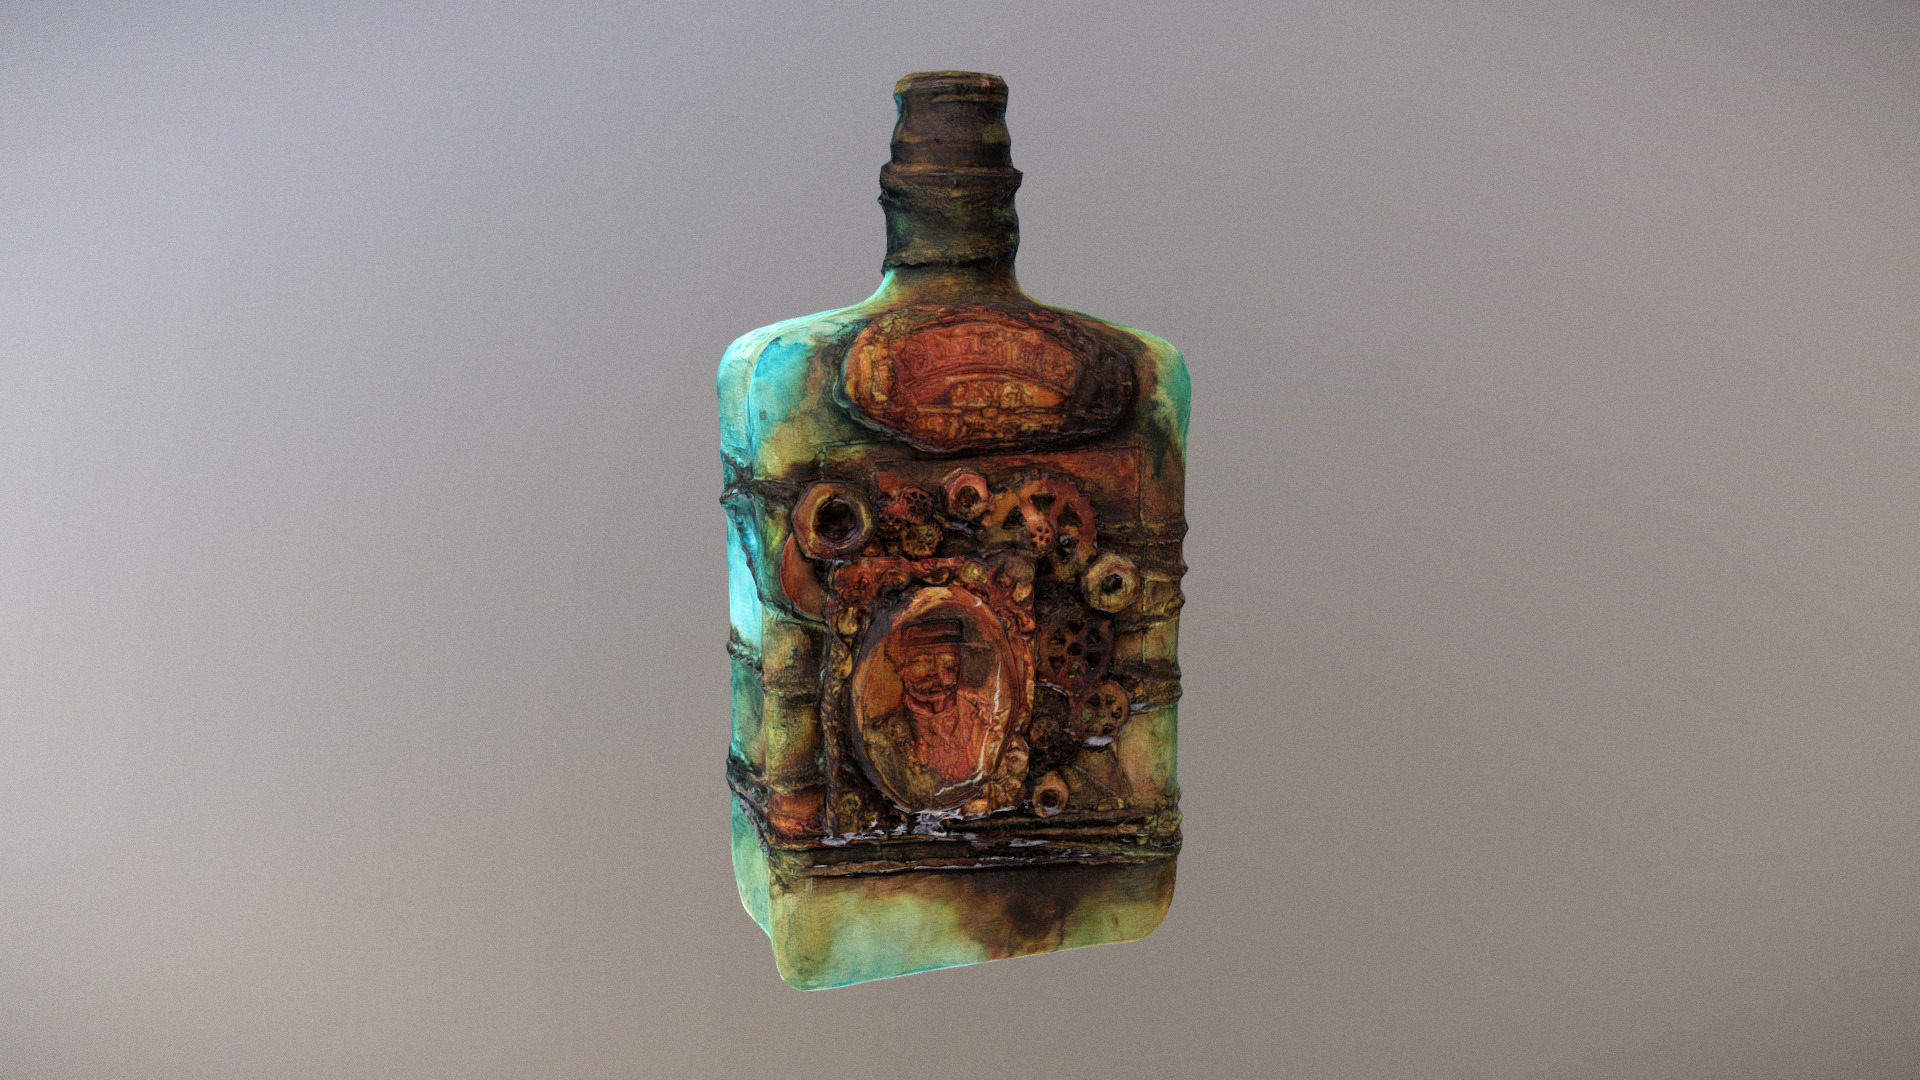 3D model Steampunk bottle - This is a 3D model of the Steampunk bottle. The 3D model is about a glass bottle with a blue and gold top.